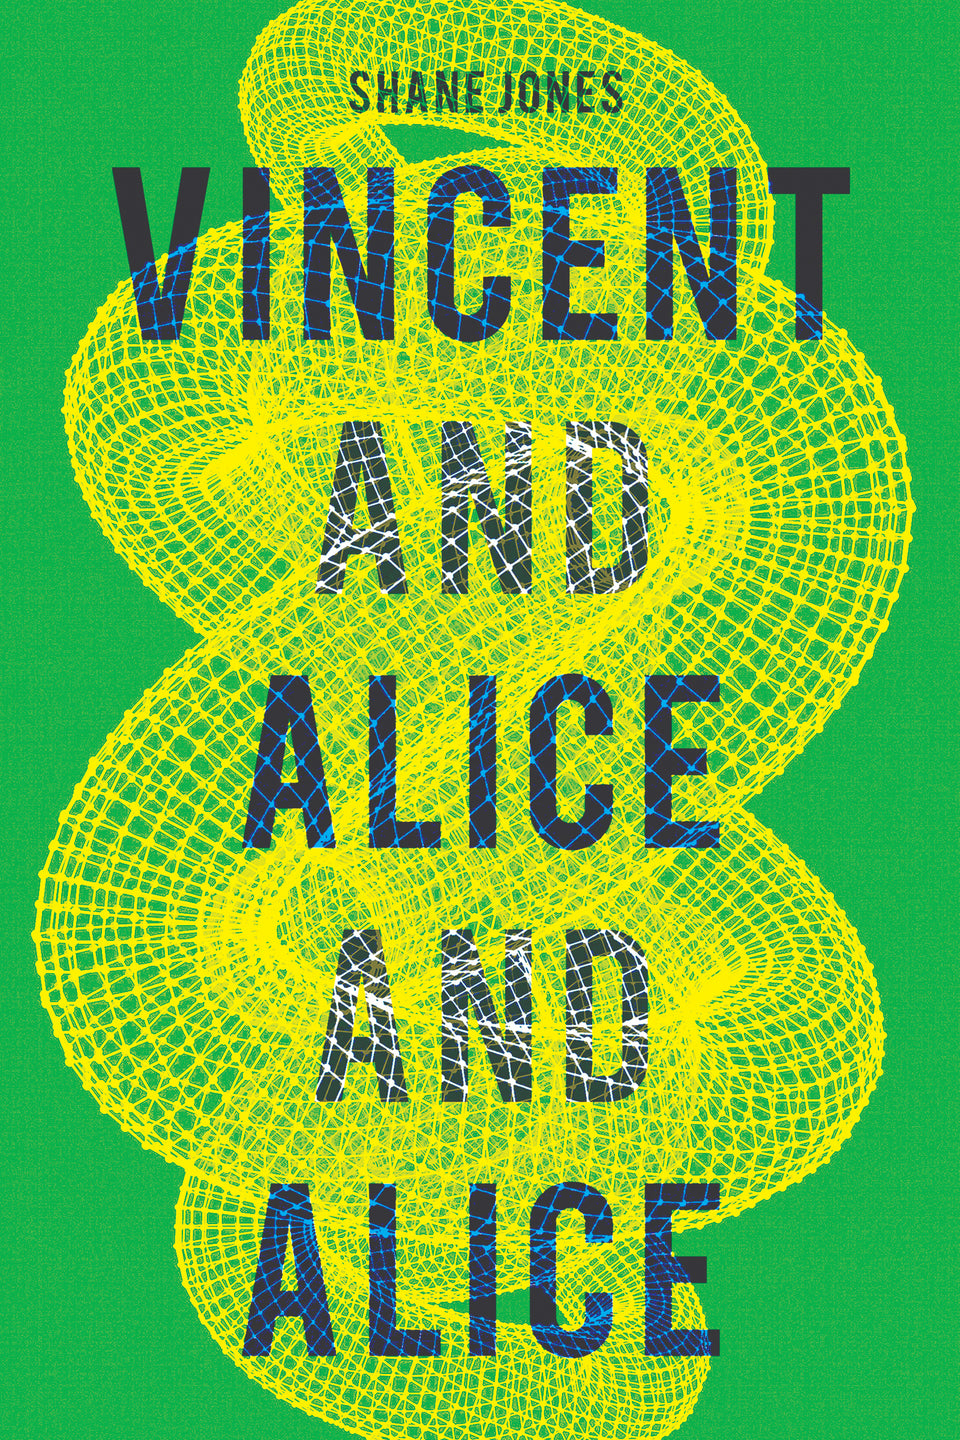 Vincent and Alice and Alice